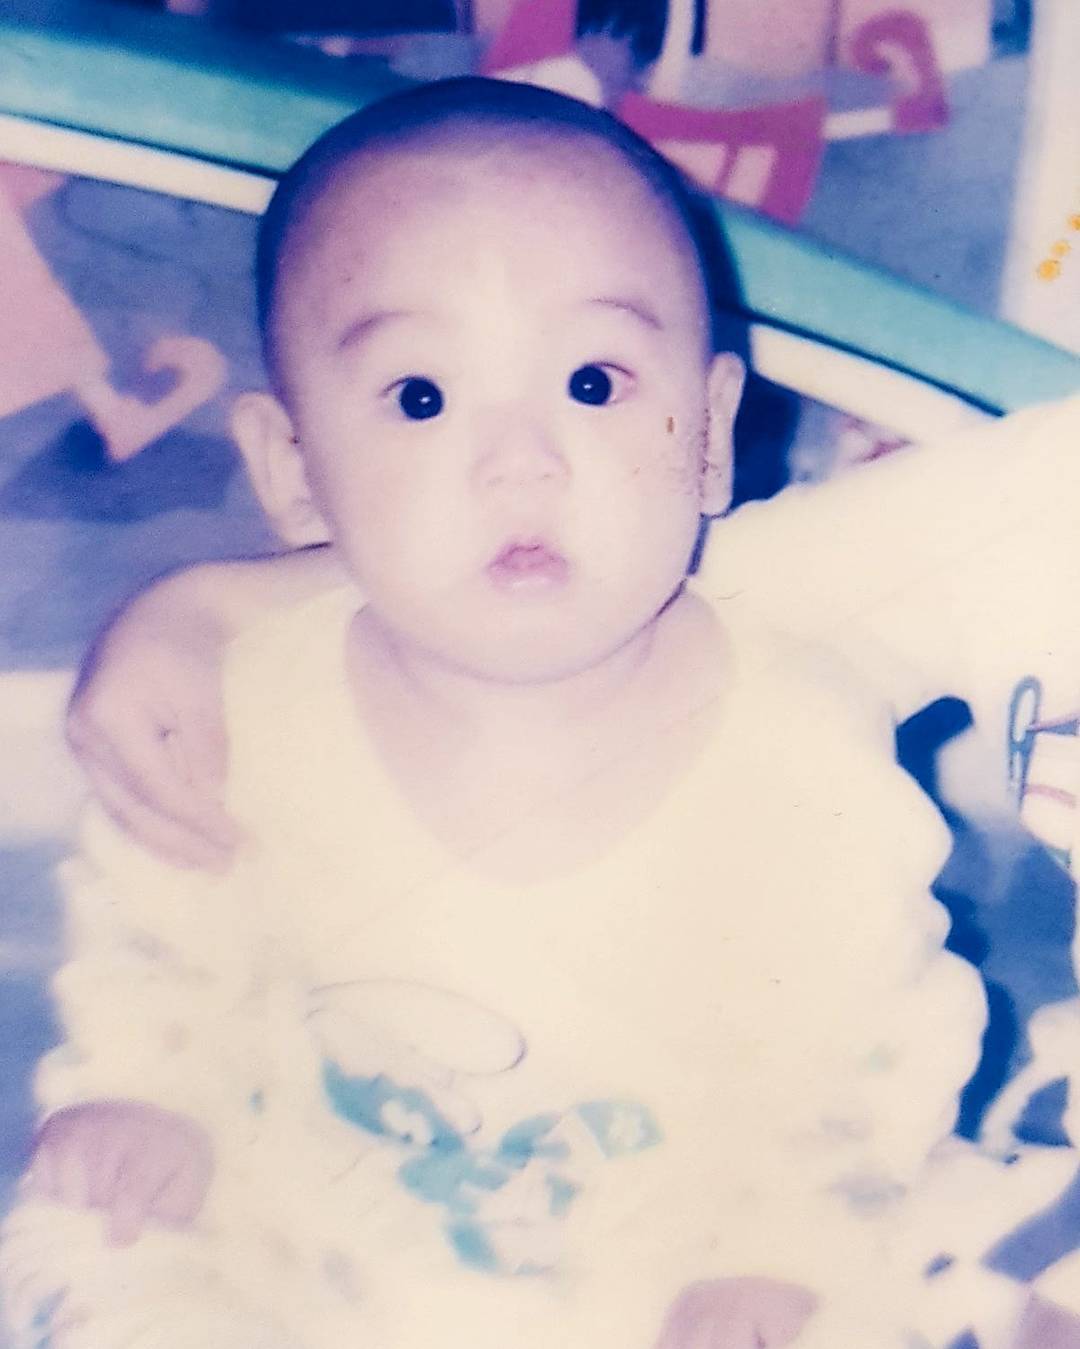 BTS Jungkook’s Supercute Childhood Pictures That Will Make Fans Go ‘aww’